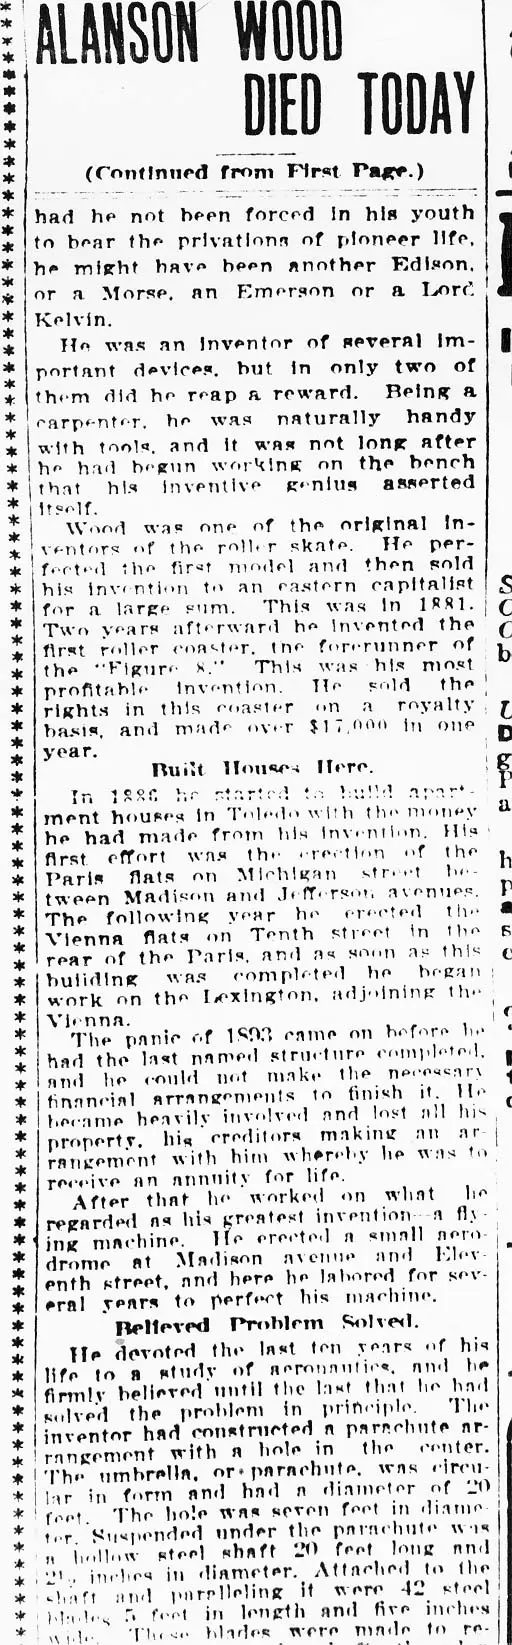 Wood's Obituary from the Toledo Blade, May 4, 1909, page 3